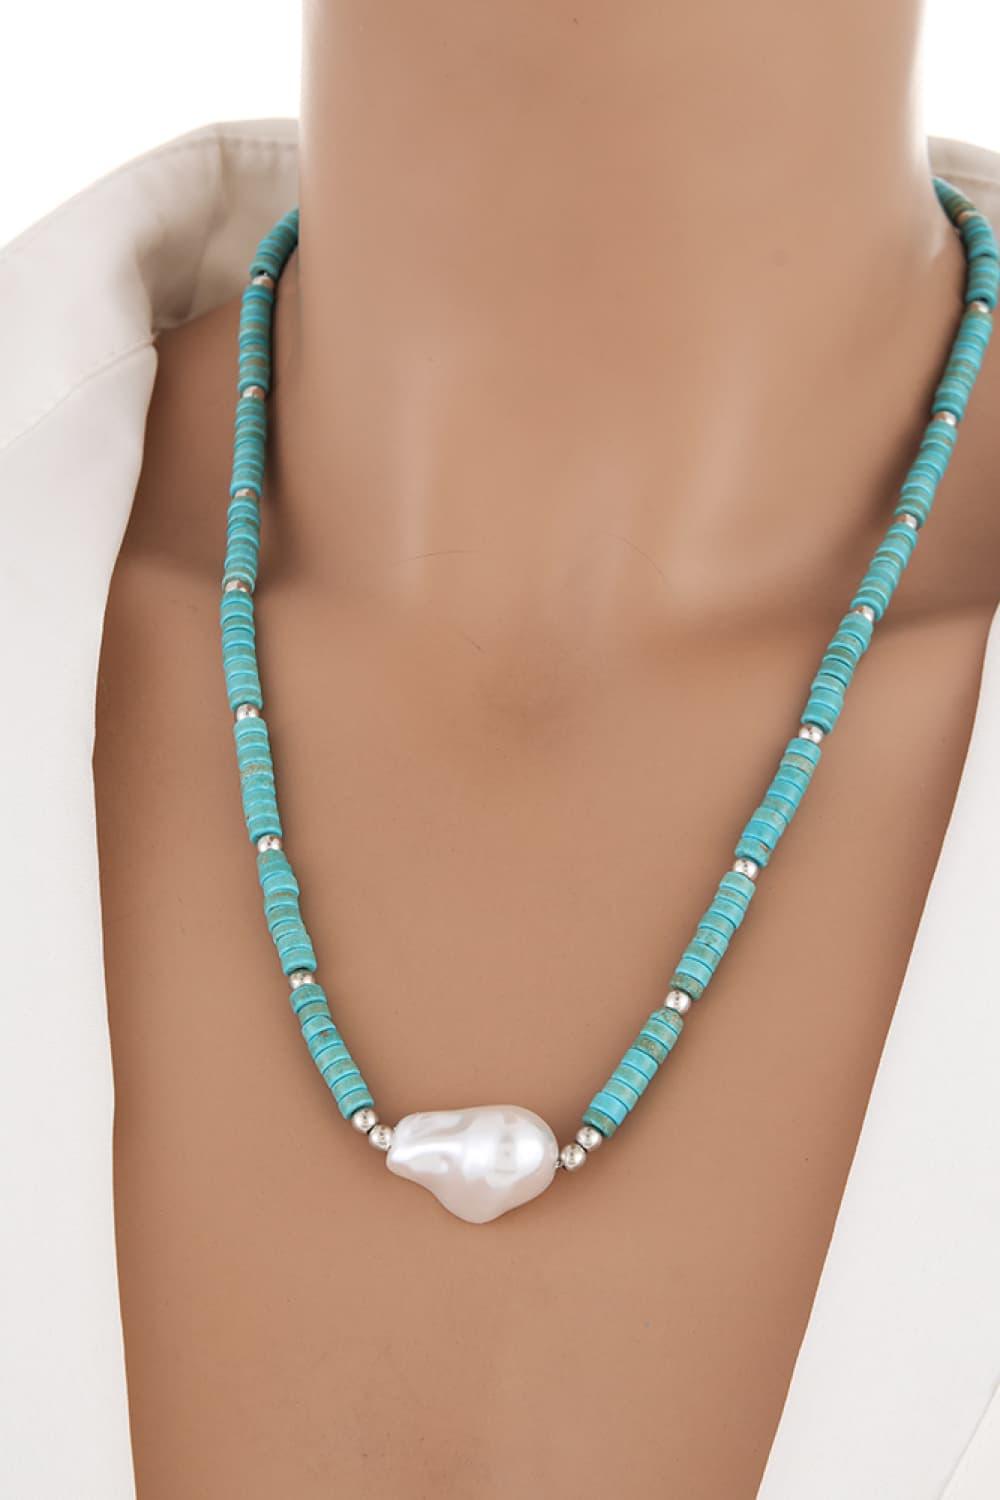 Turquoise & Pearl Necklace - Lab Fashion, Home & Health